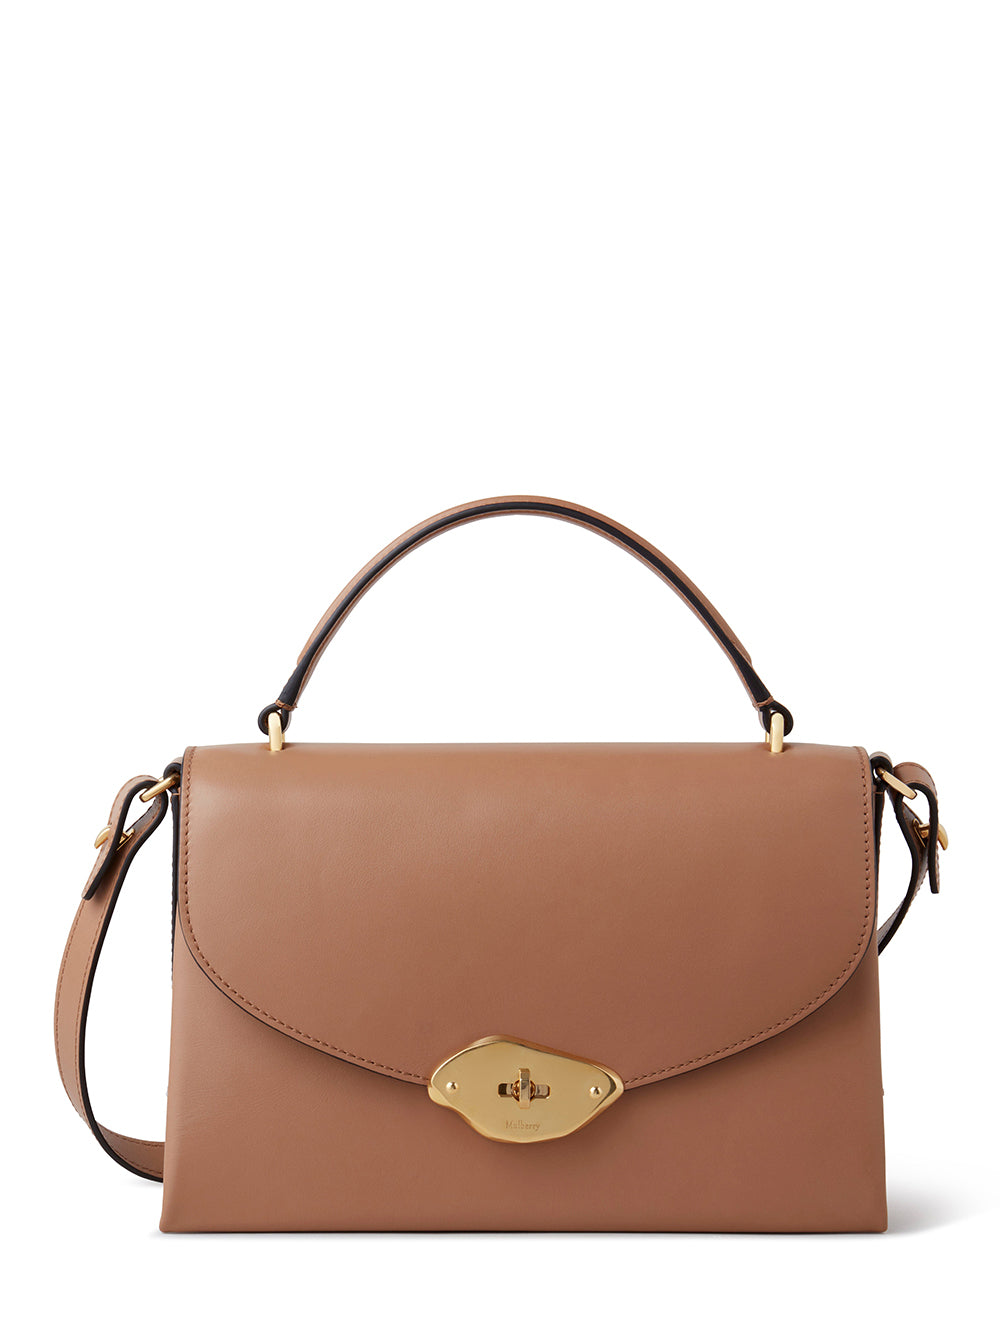 Mulberry-LanaTopHandle-SableHighGlossLeather-1